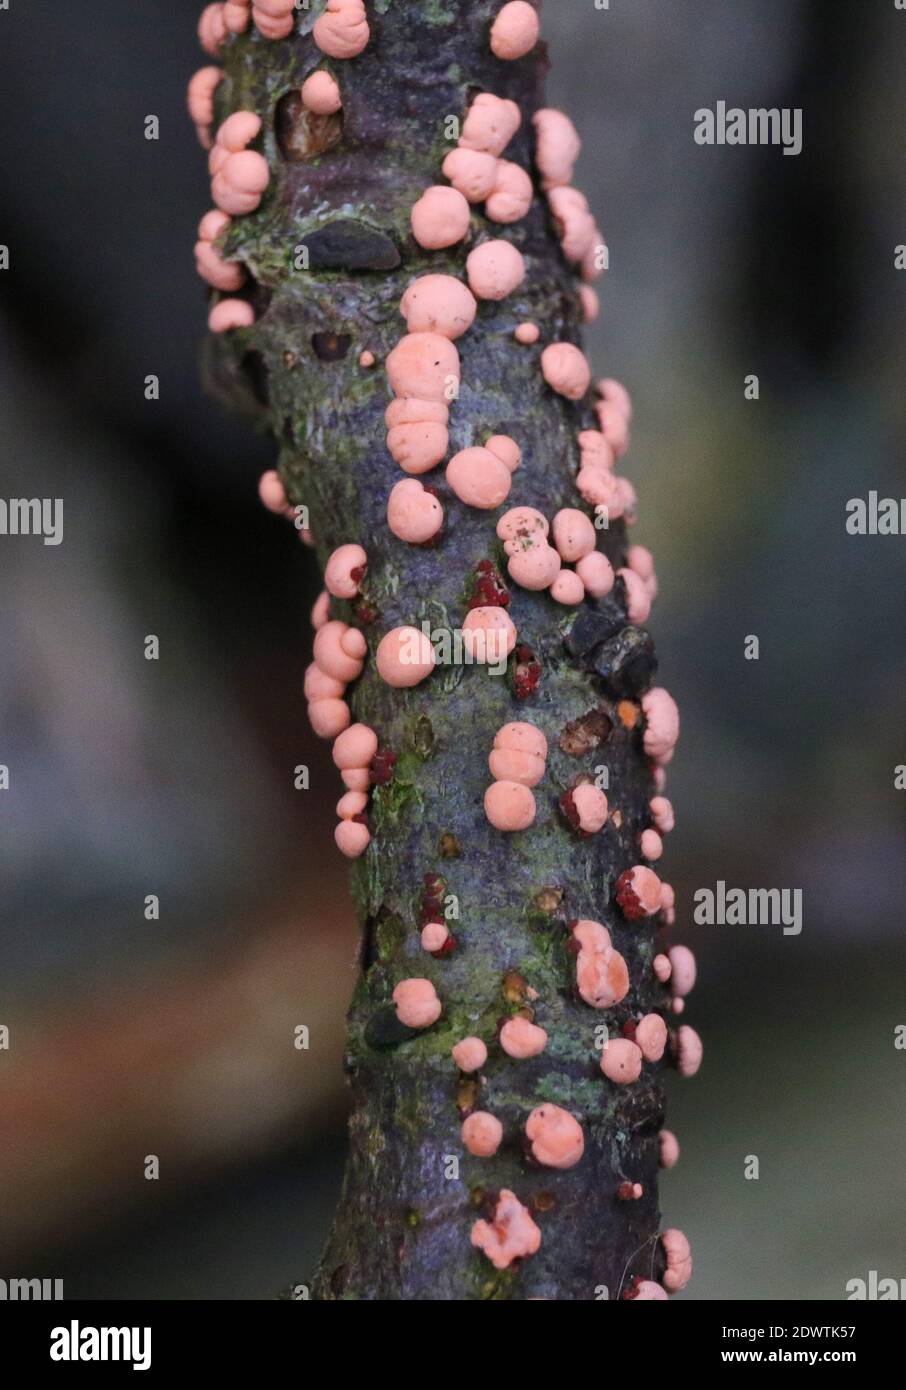 Close-up coral spot disease, nectria cinnabarina, on wooden branch covered in pink-coral pustules from the Saprophytic fungi. Stock Photo